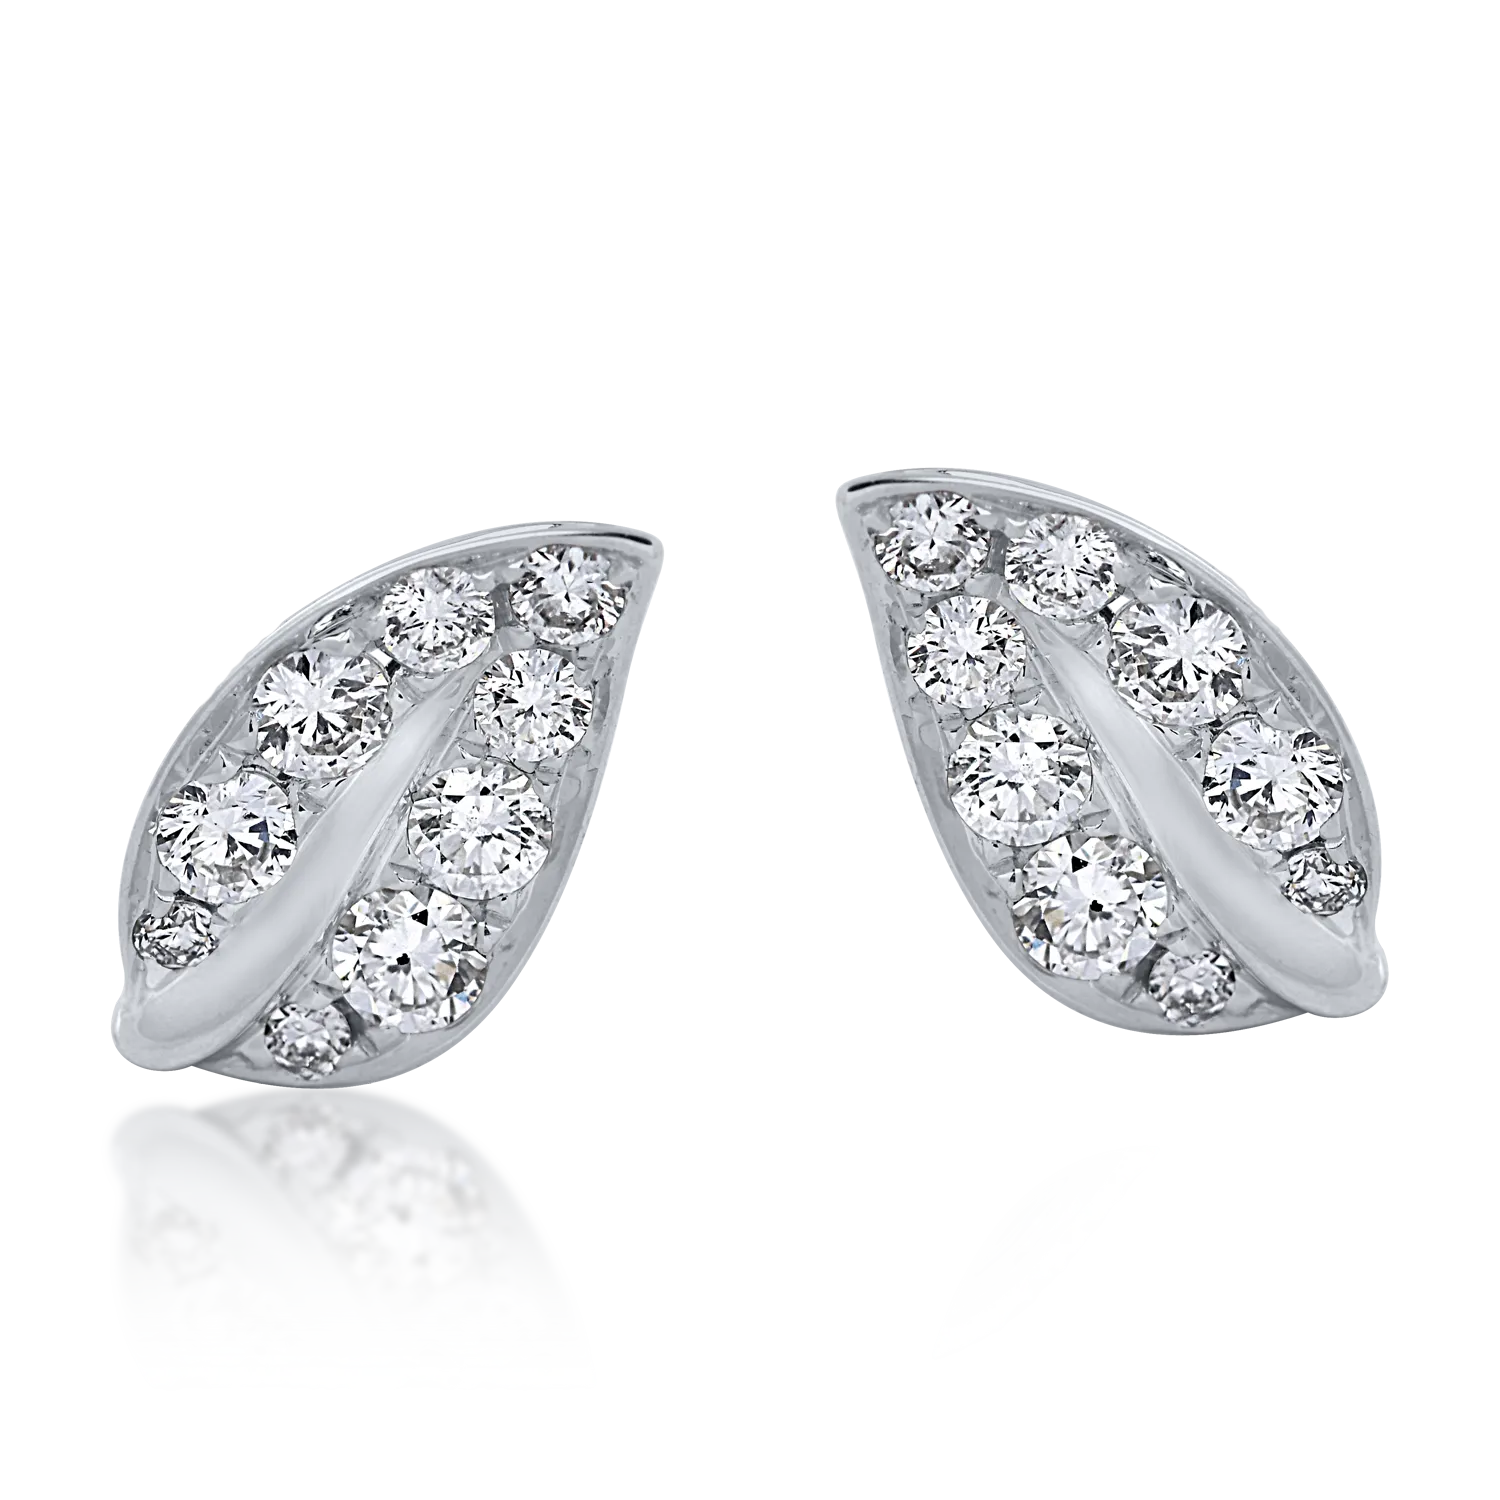 White gold earrings with 0.33ct diamonds